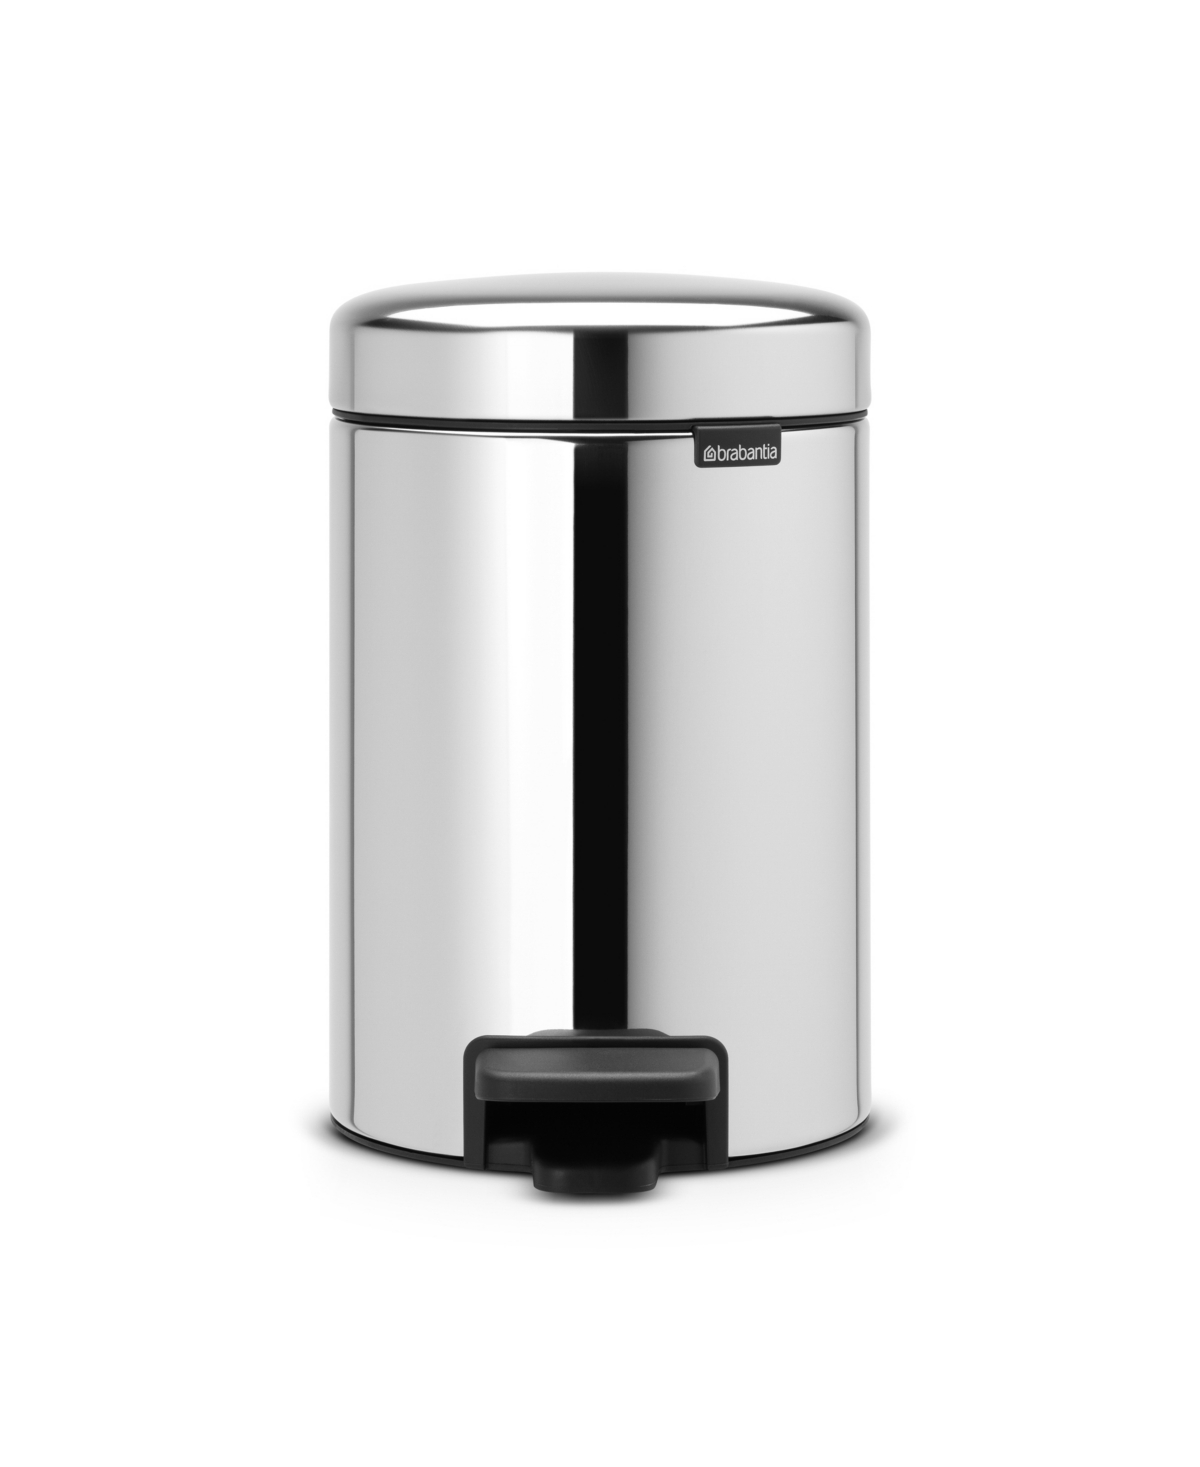 Brabantia New Icon Step On Trash Can, 0.8 Gallon, 3 Liter In Brilliant Steel